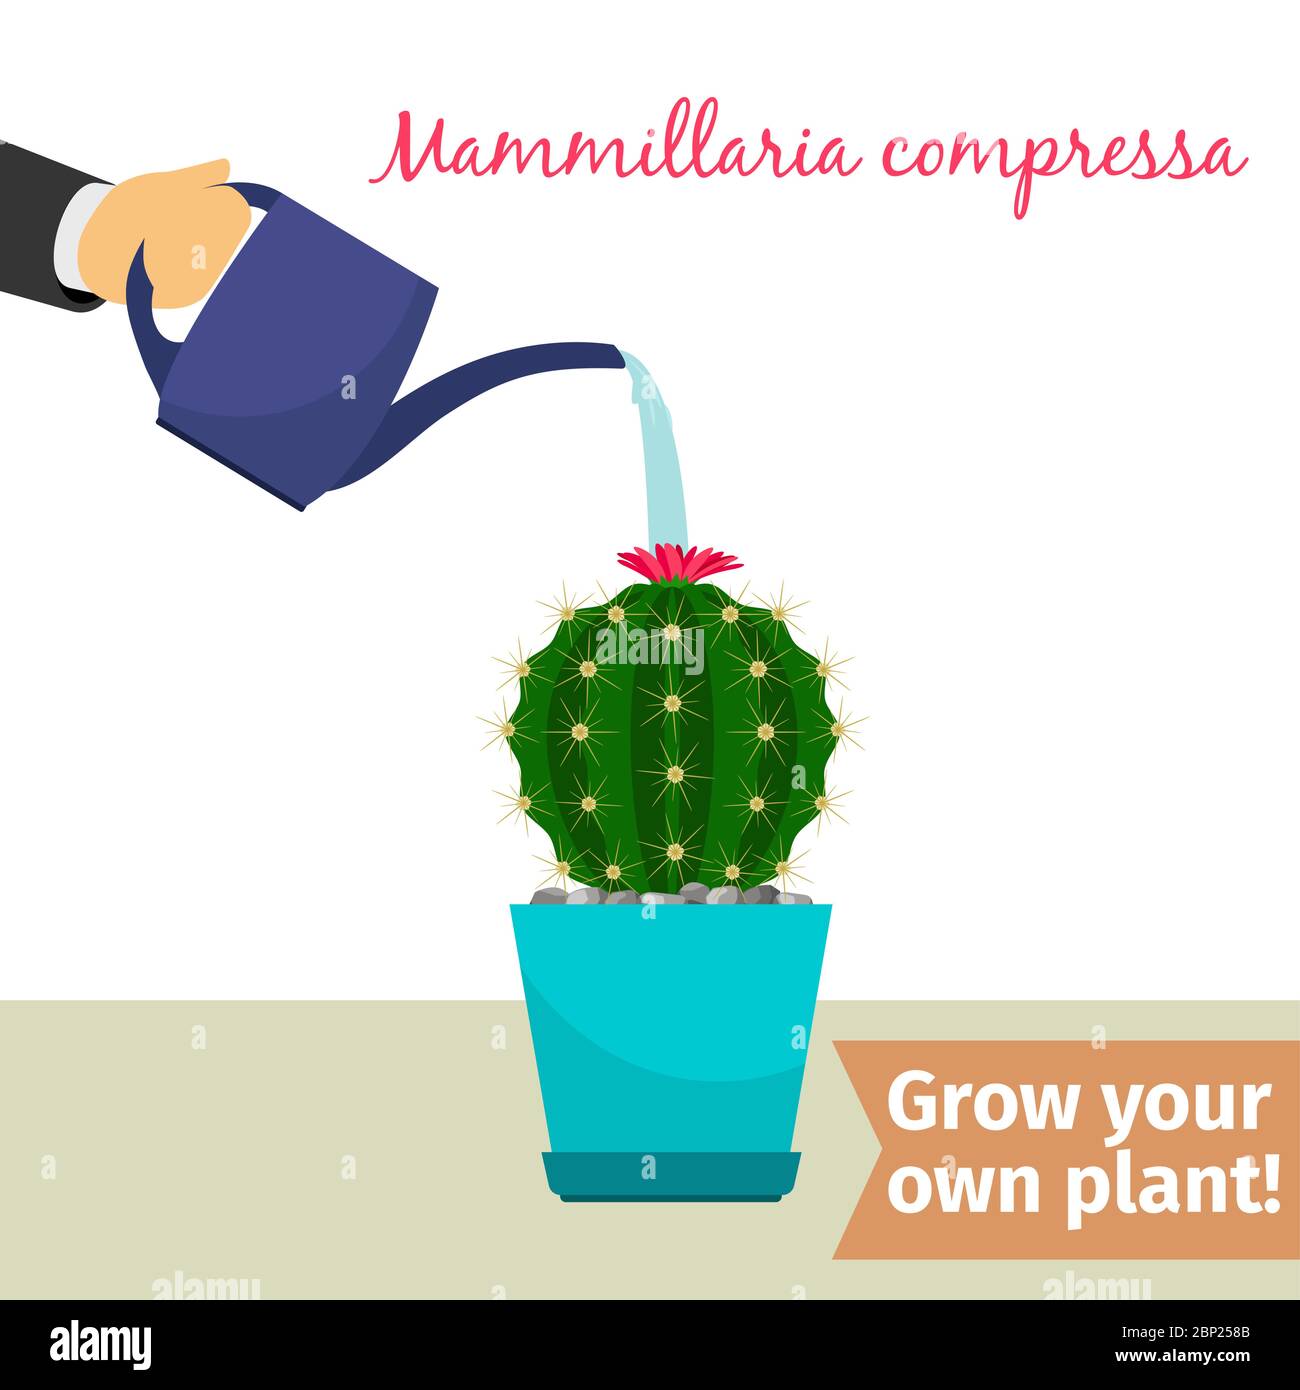 Hand with watering can pours mammillaria compressa vector illustration for flower shop Stock Vector